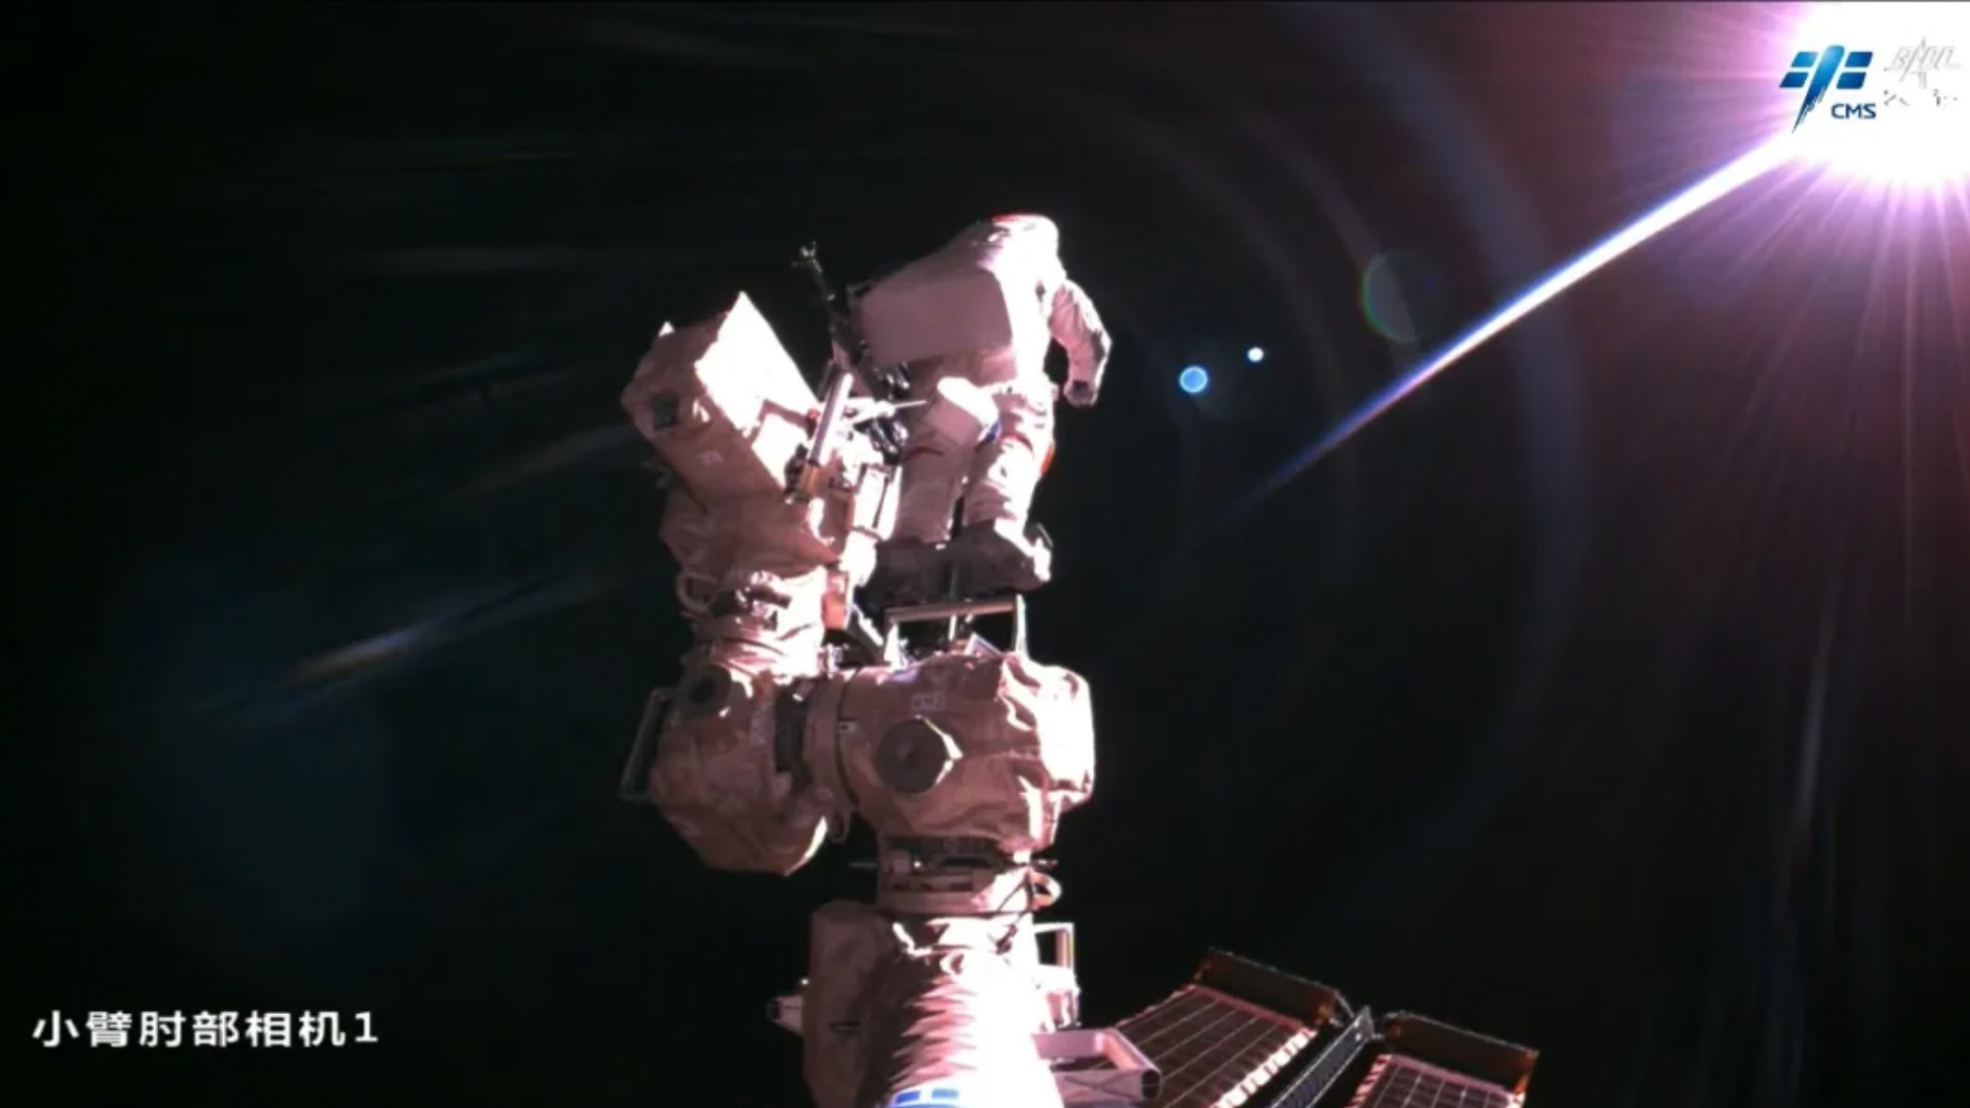 An astronaut wearing a white spacesuit stands at the end of a robotic arm with the blackness of space in the background